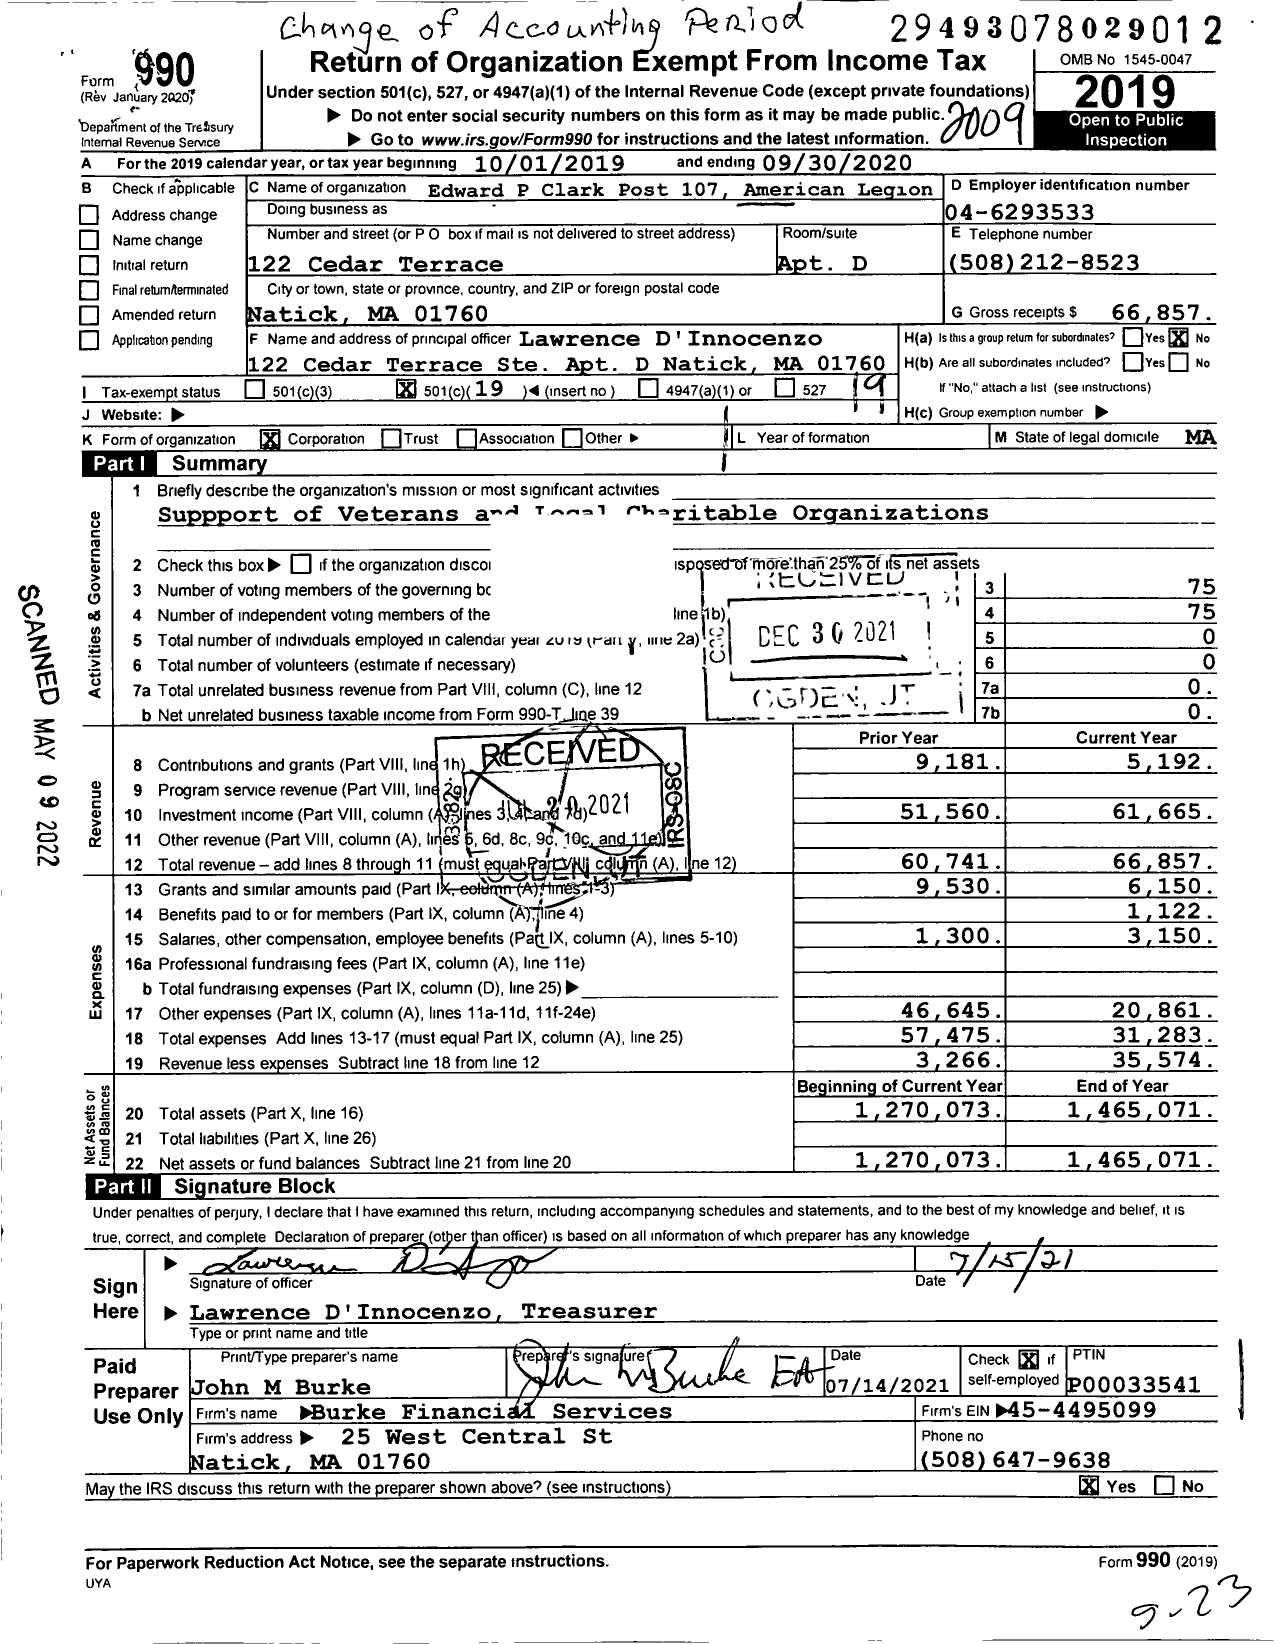 Image of first page of 2019 Form 990O for Edward P Clark Post 107 American Legion